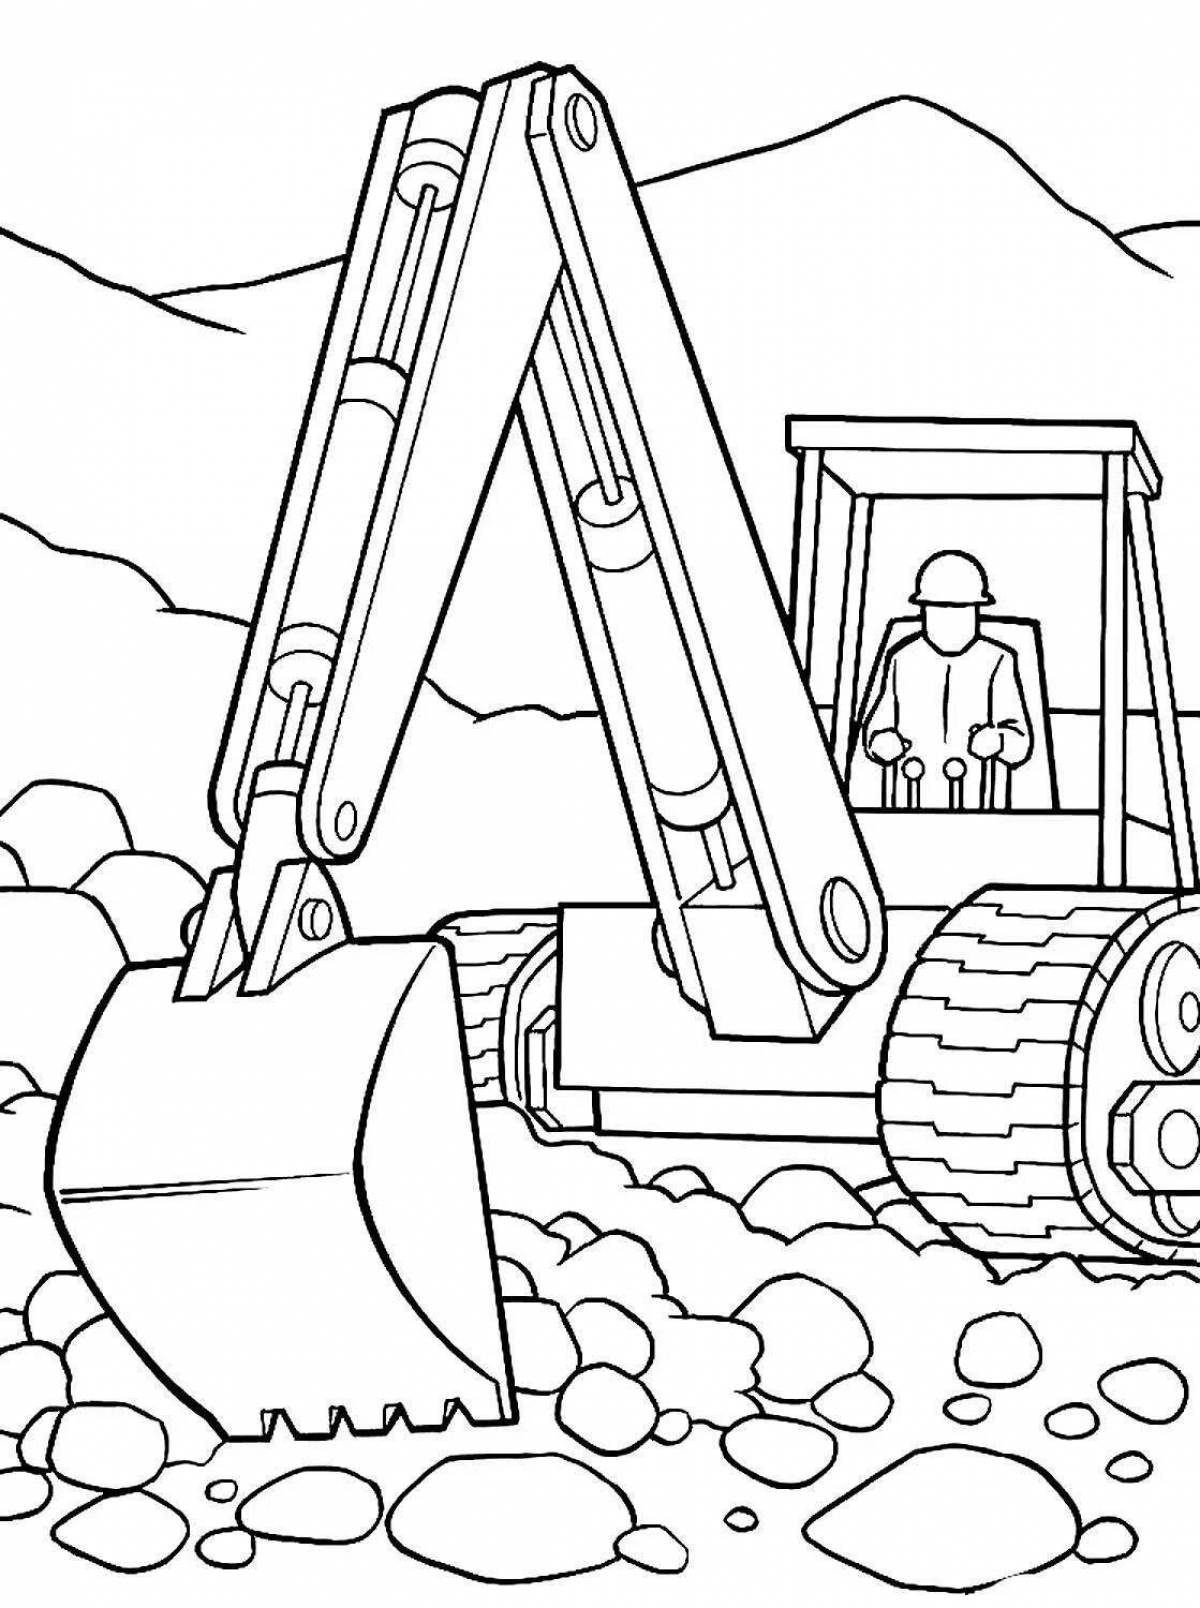 Coloring book unusual construction equipment for children 6-7 years old